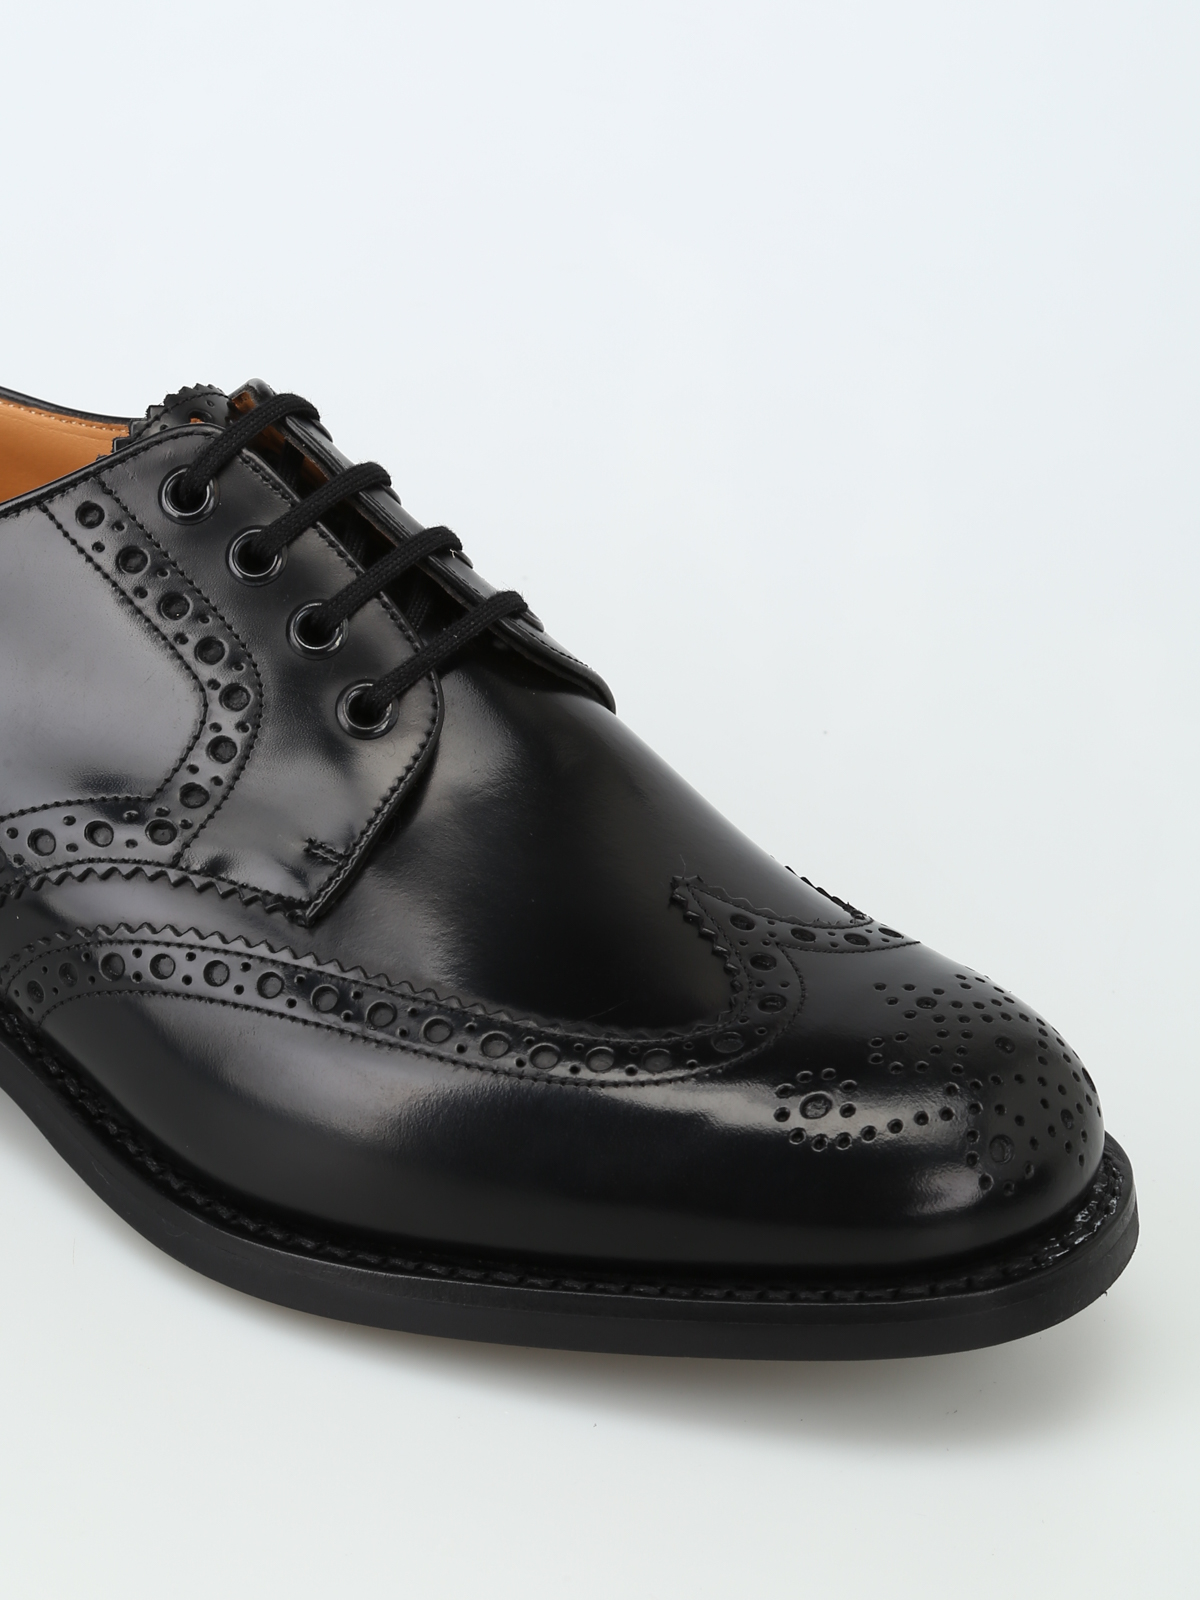 leather Derby brogues - lace-ups shoes 